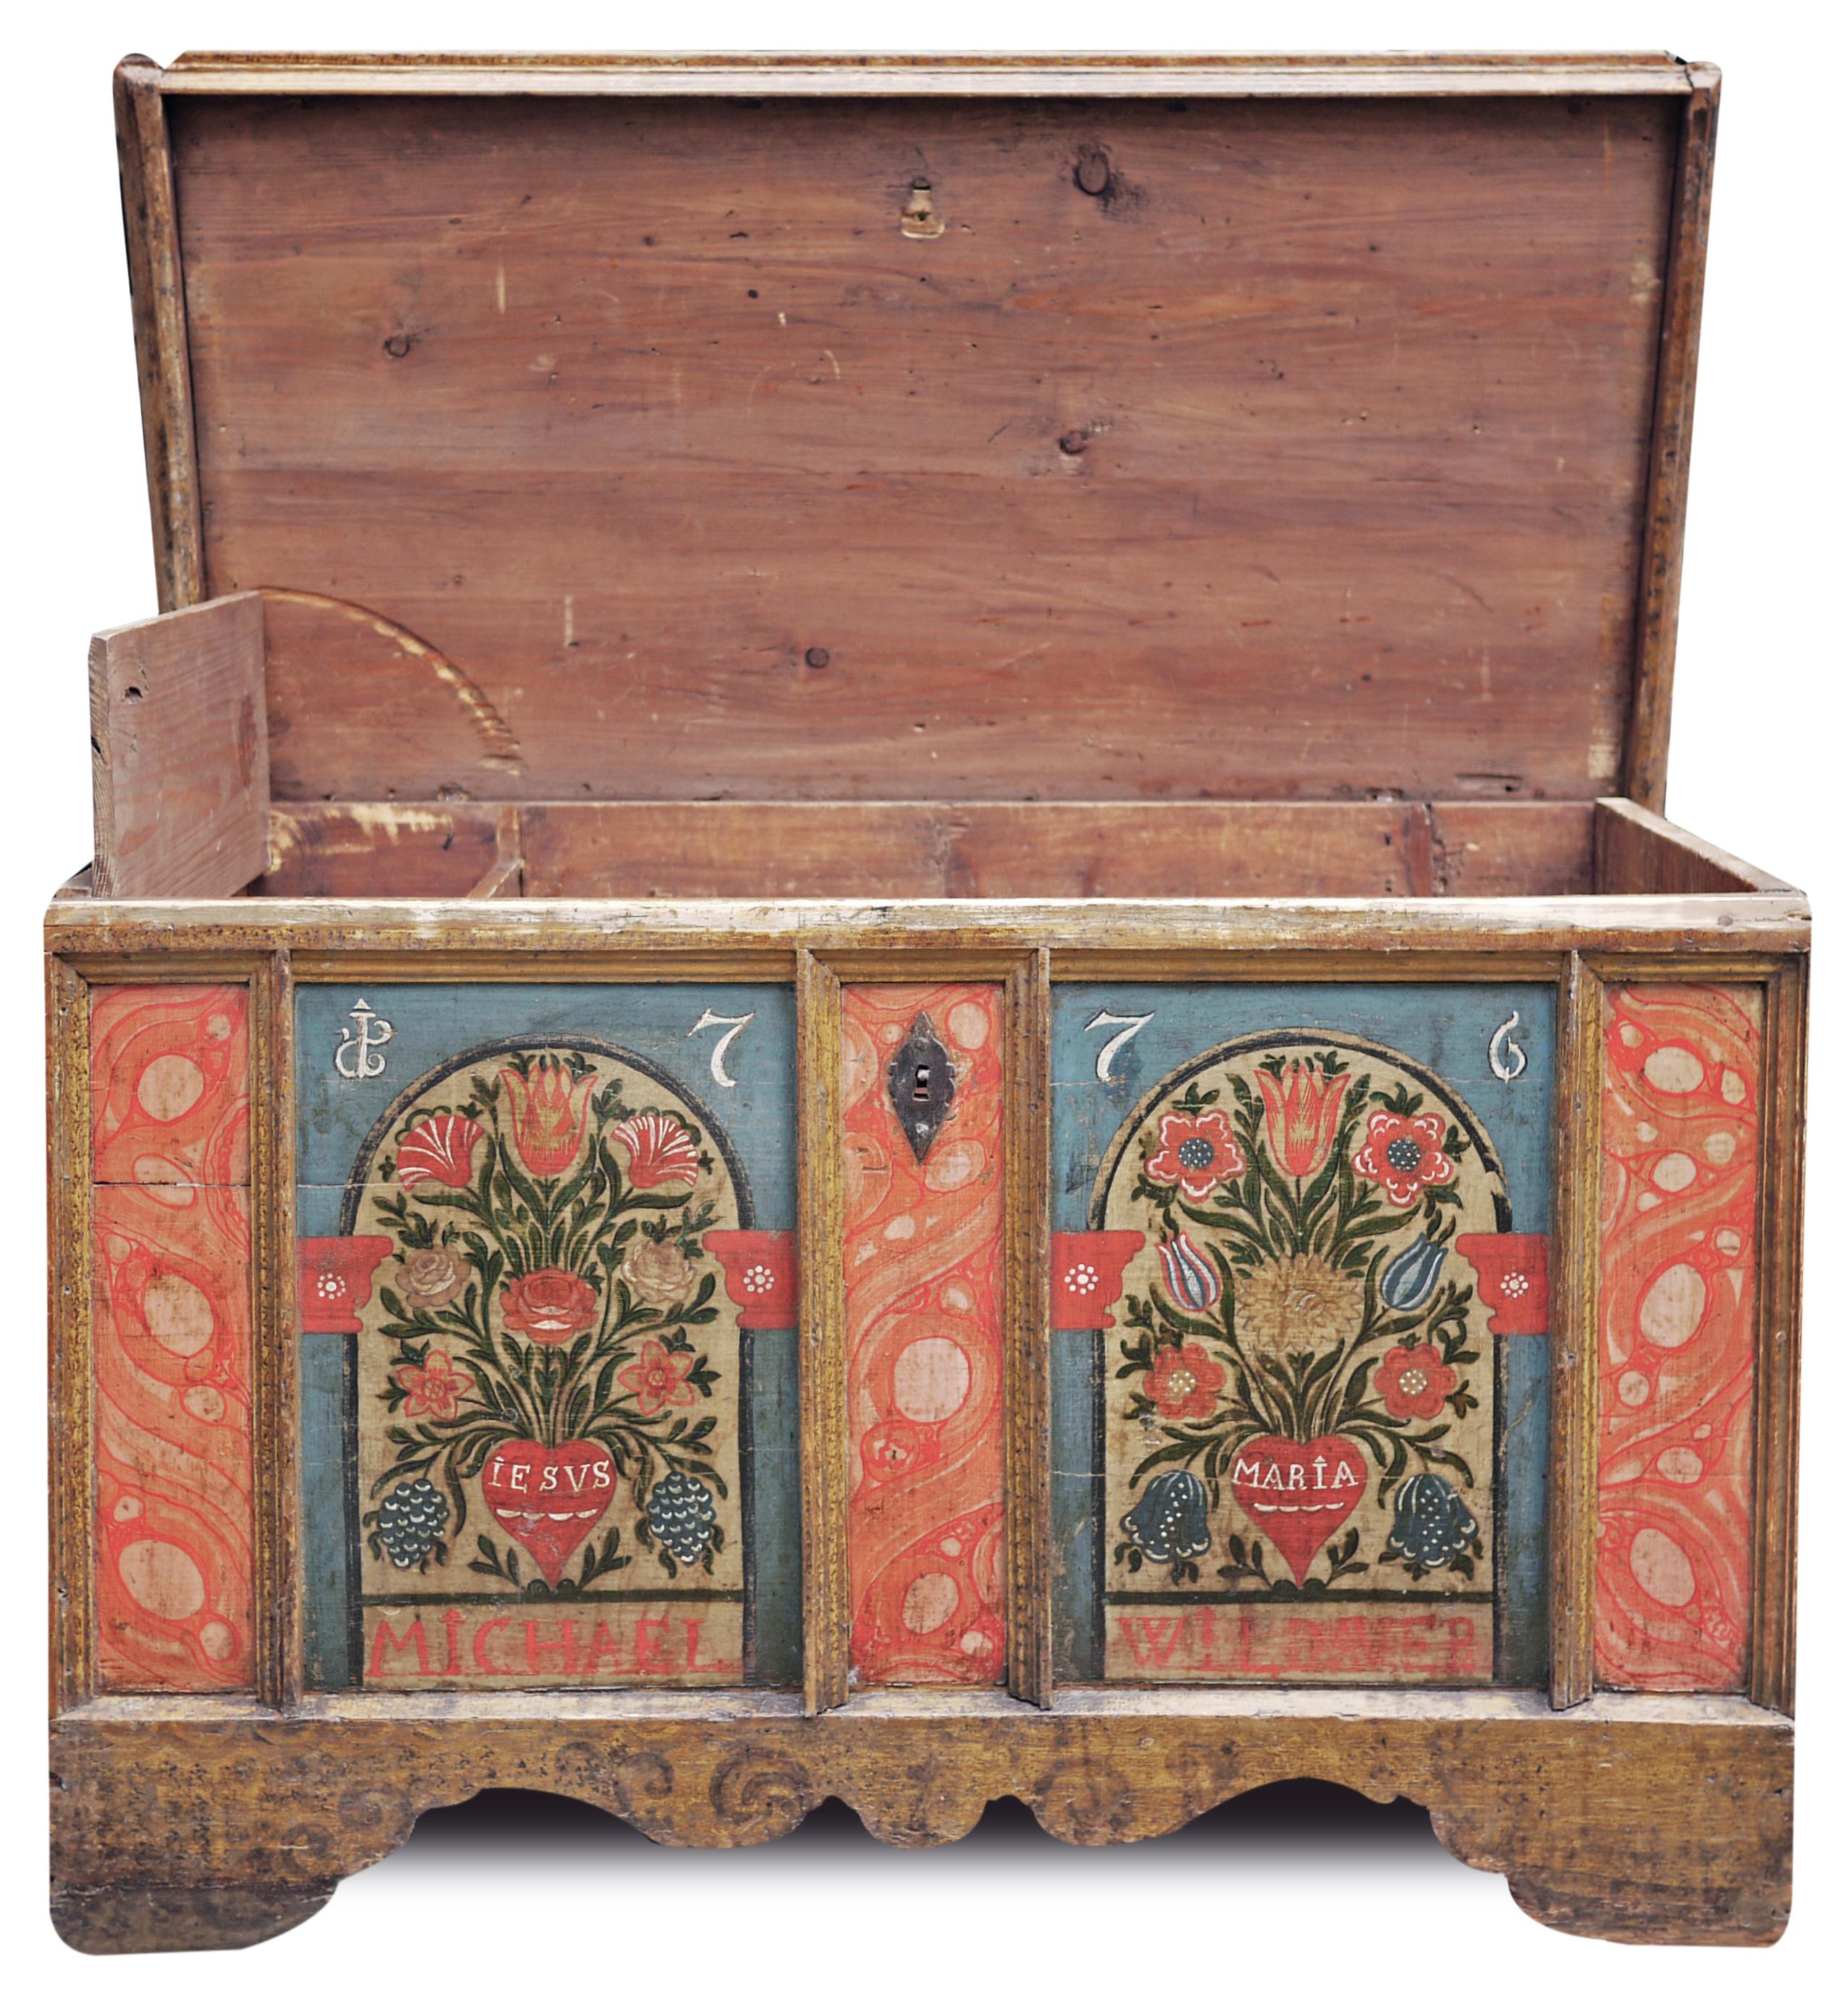 Folk Art Exceptional Floral Painted Blue and Red Blanket Chest, Alps 1776 - Original